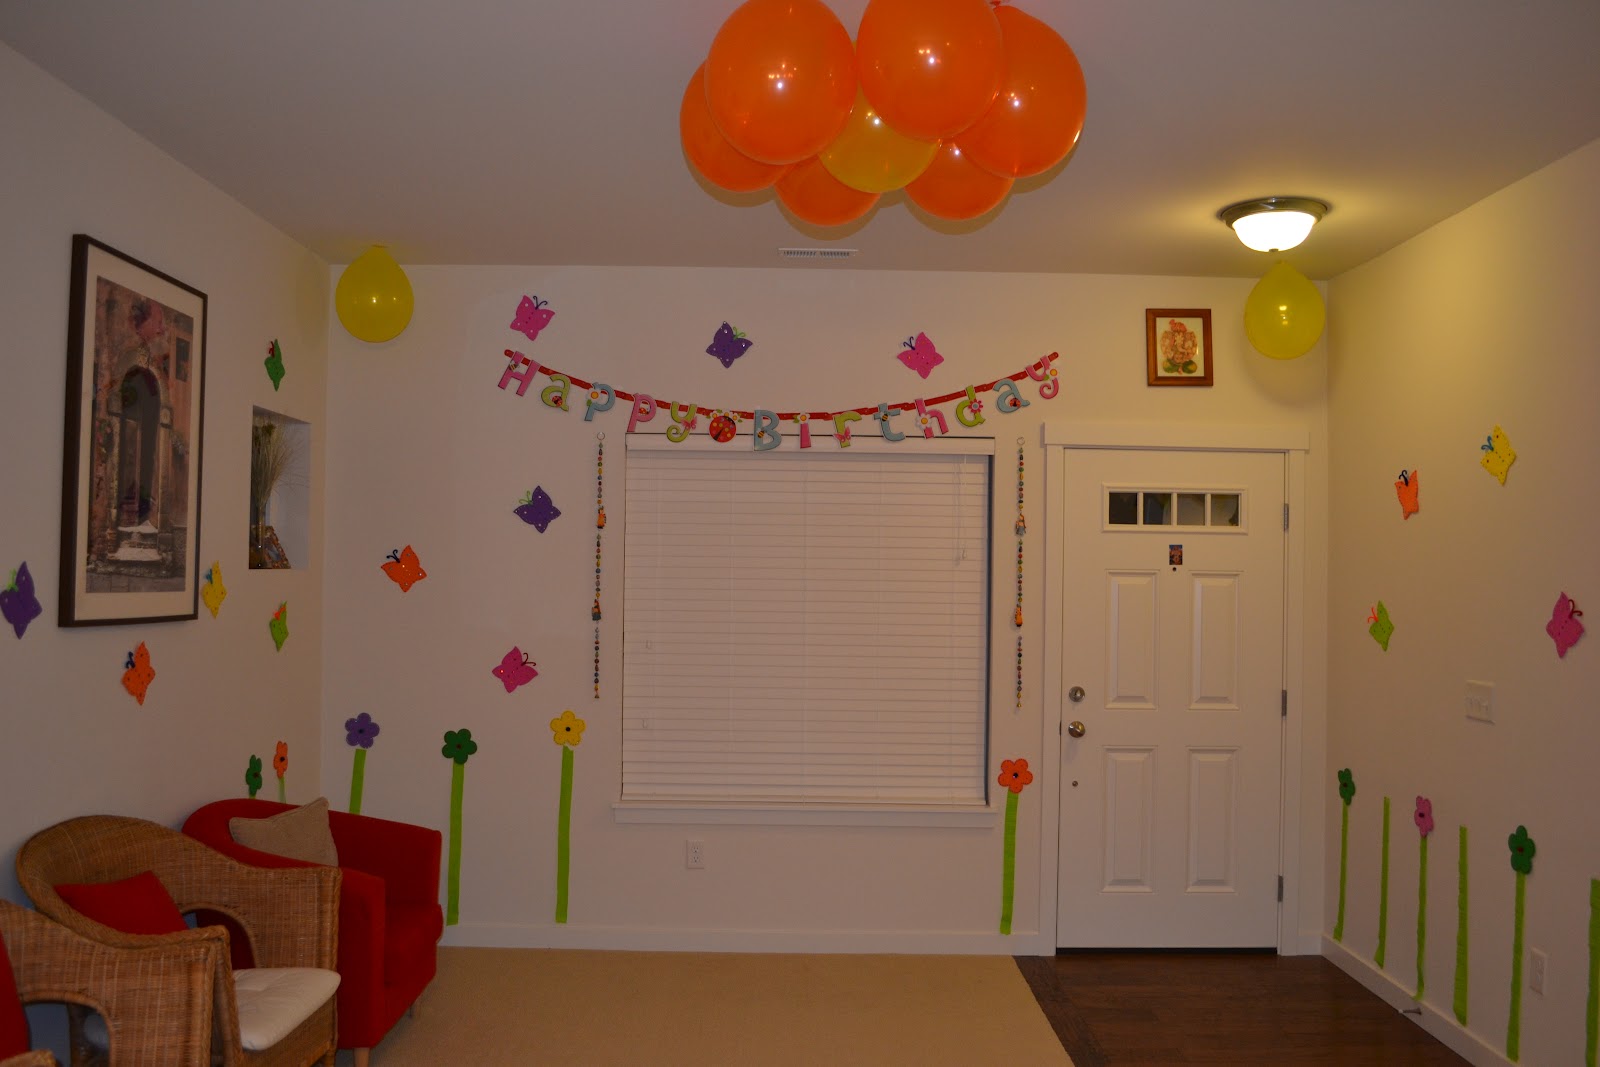 How to Decorate a Room for Birthday Party - ColourDrive Home Varsity